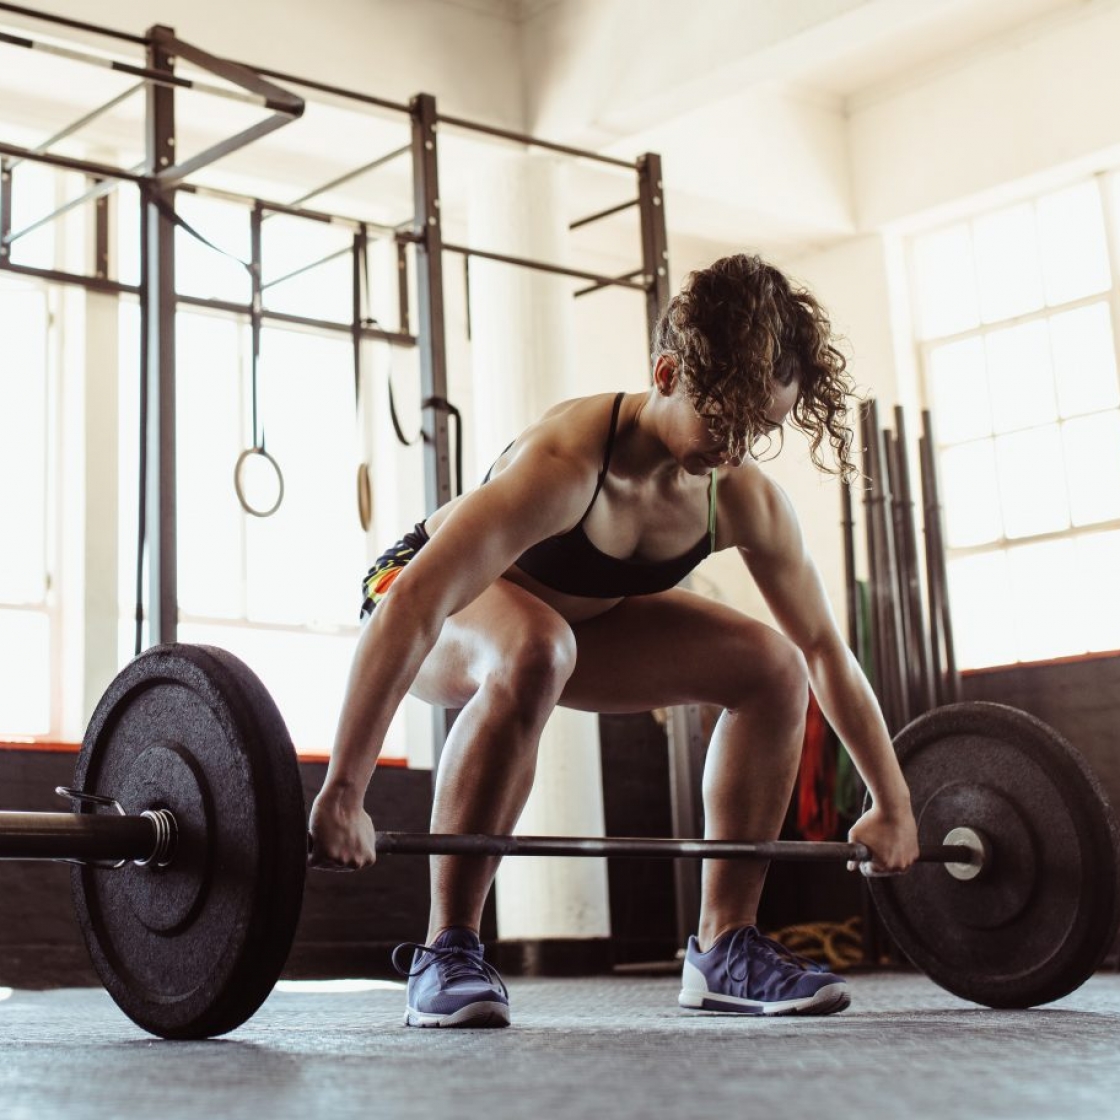 How to Increase Your Grip Strength - Ladies Who Lift